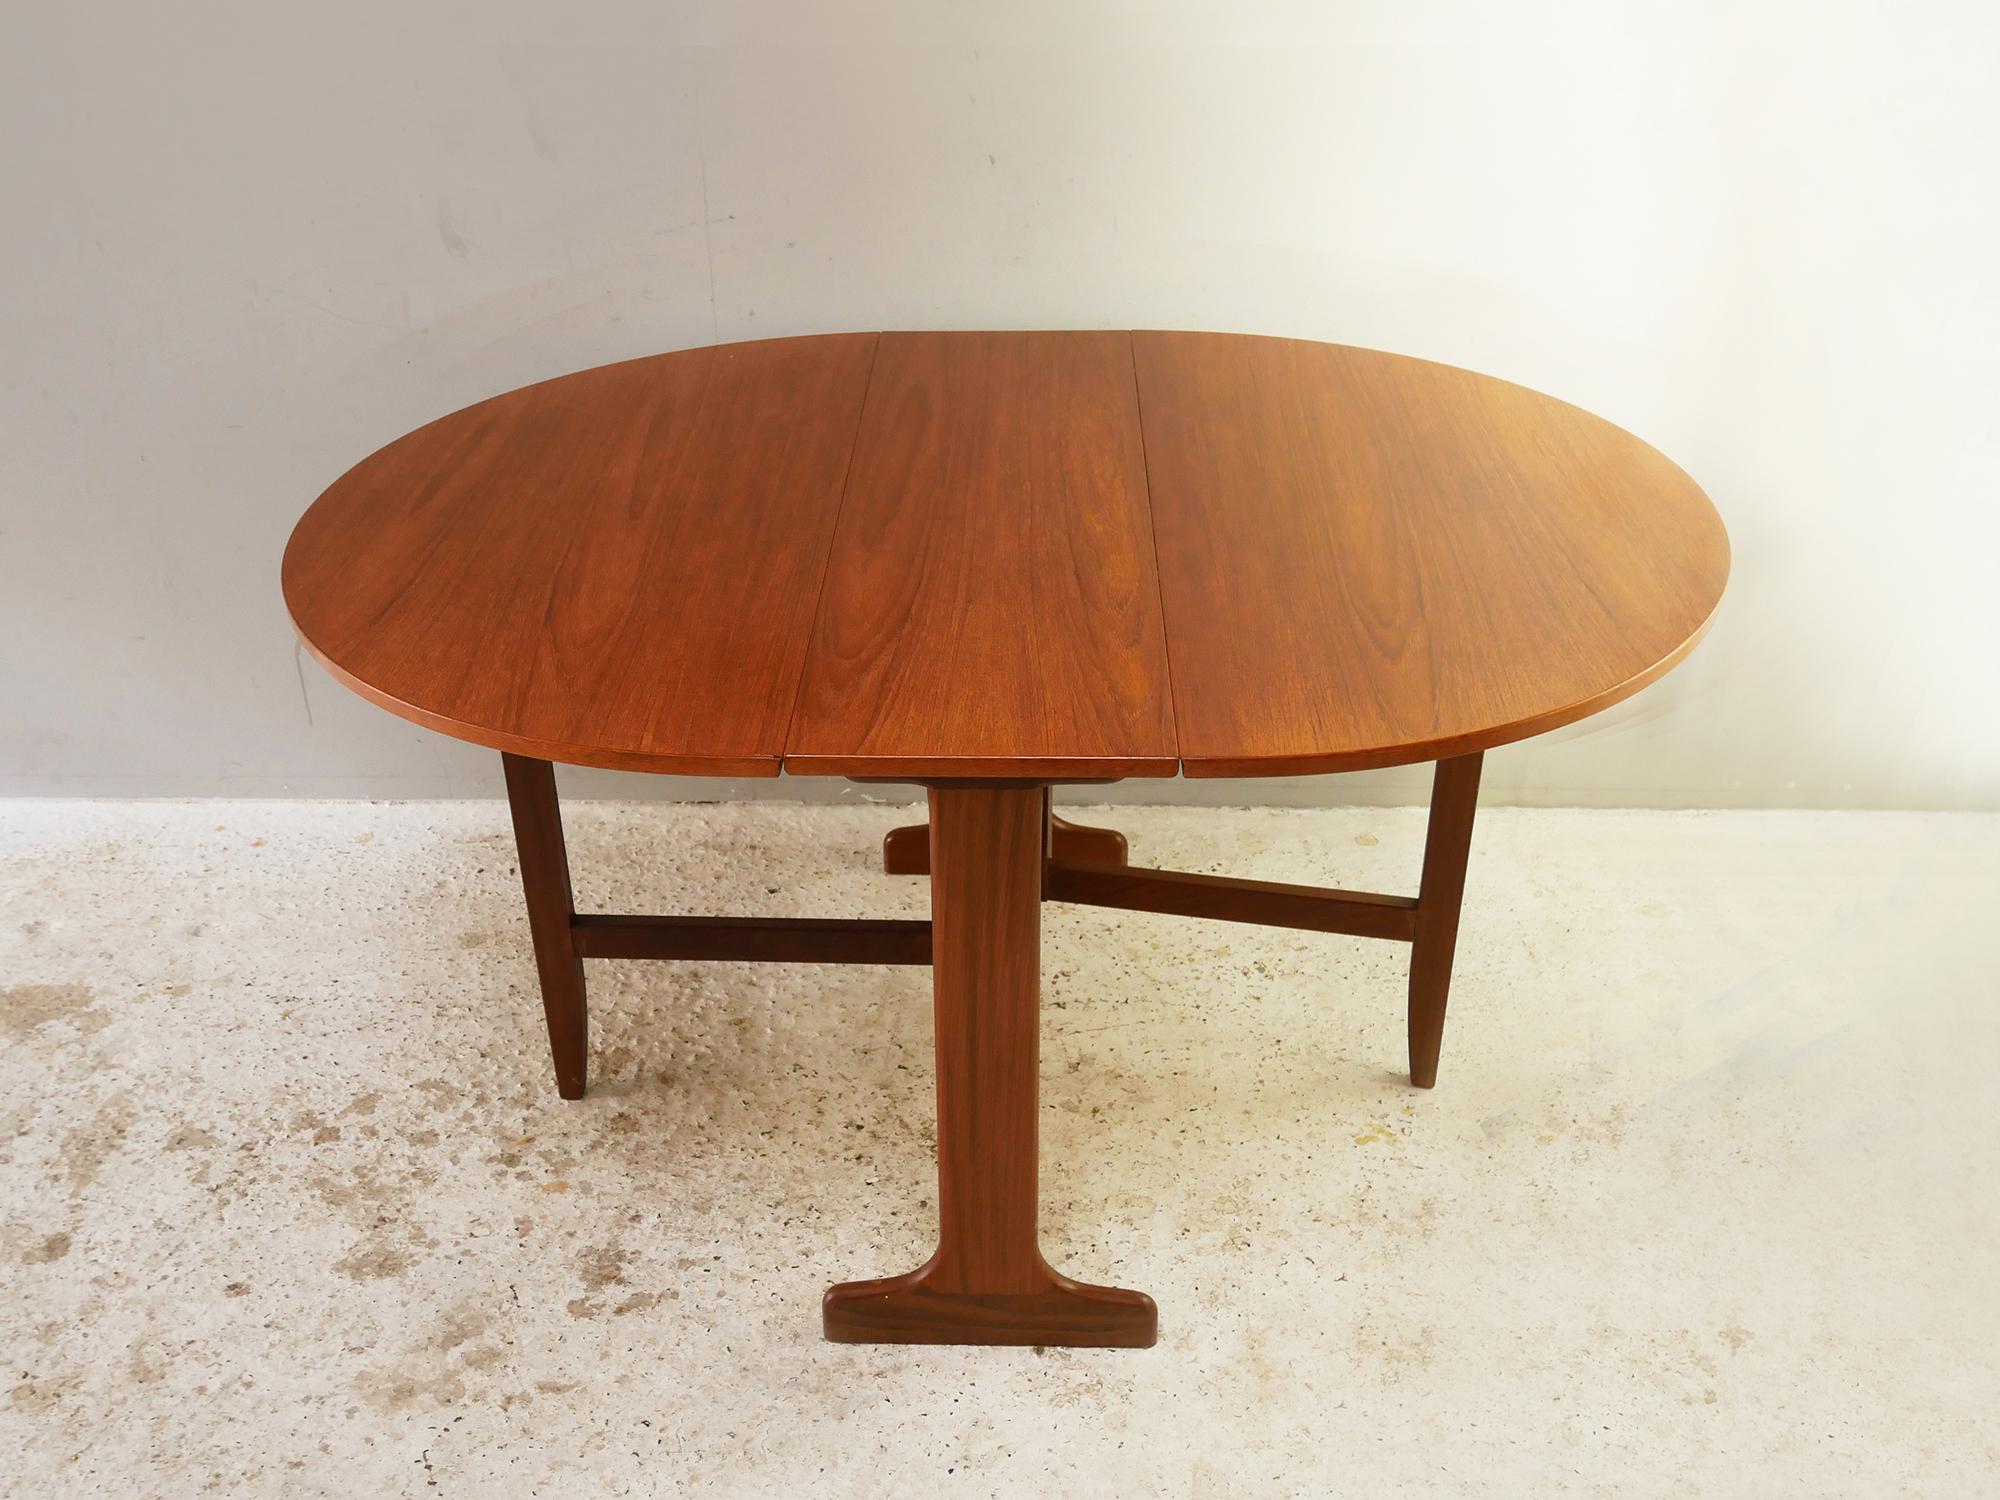 Ideal for a small space. A good sized extending dining table for the kitchen or the dining room. Two drop down sections allow 3 different sizes. When both flaps are down it is very narrow easy to store away. In fantastic condition with lovely warm